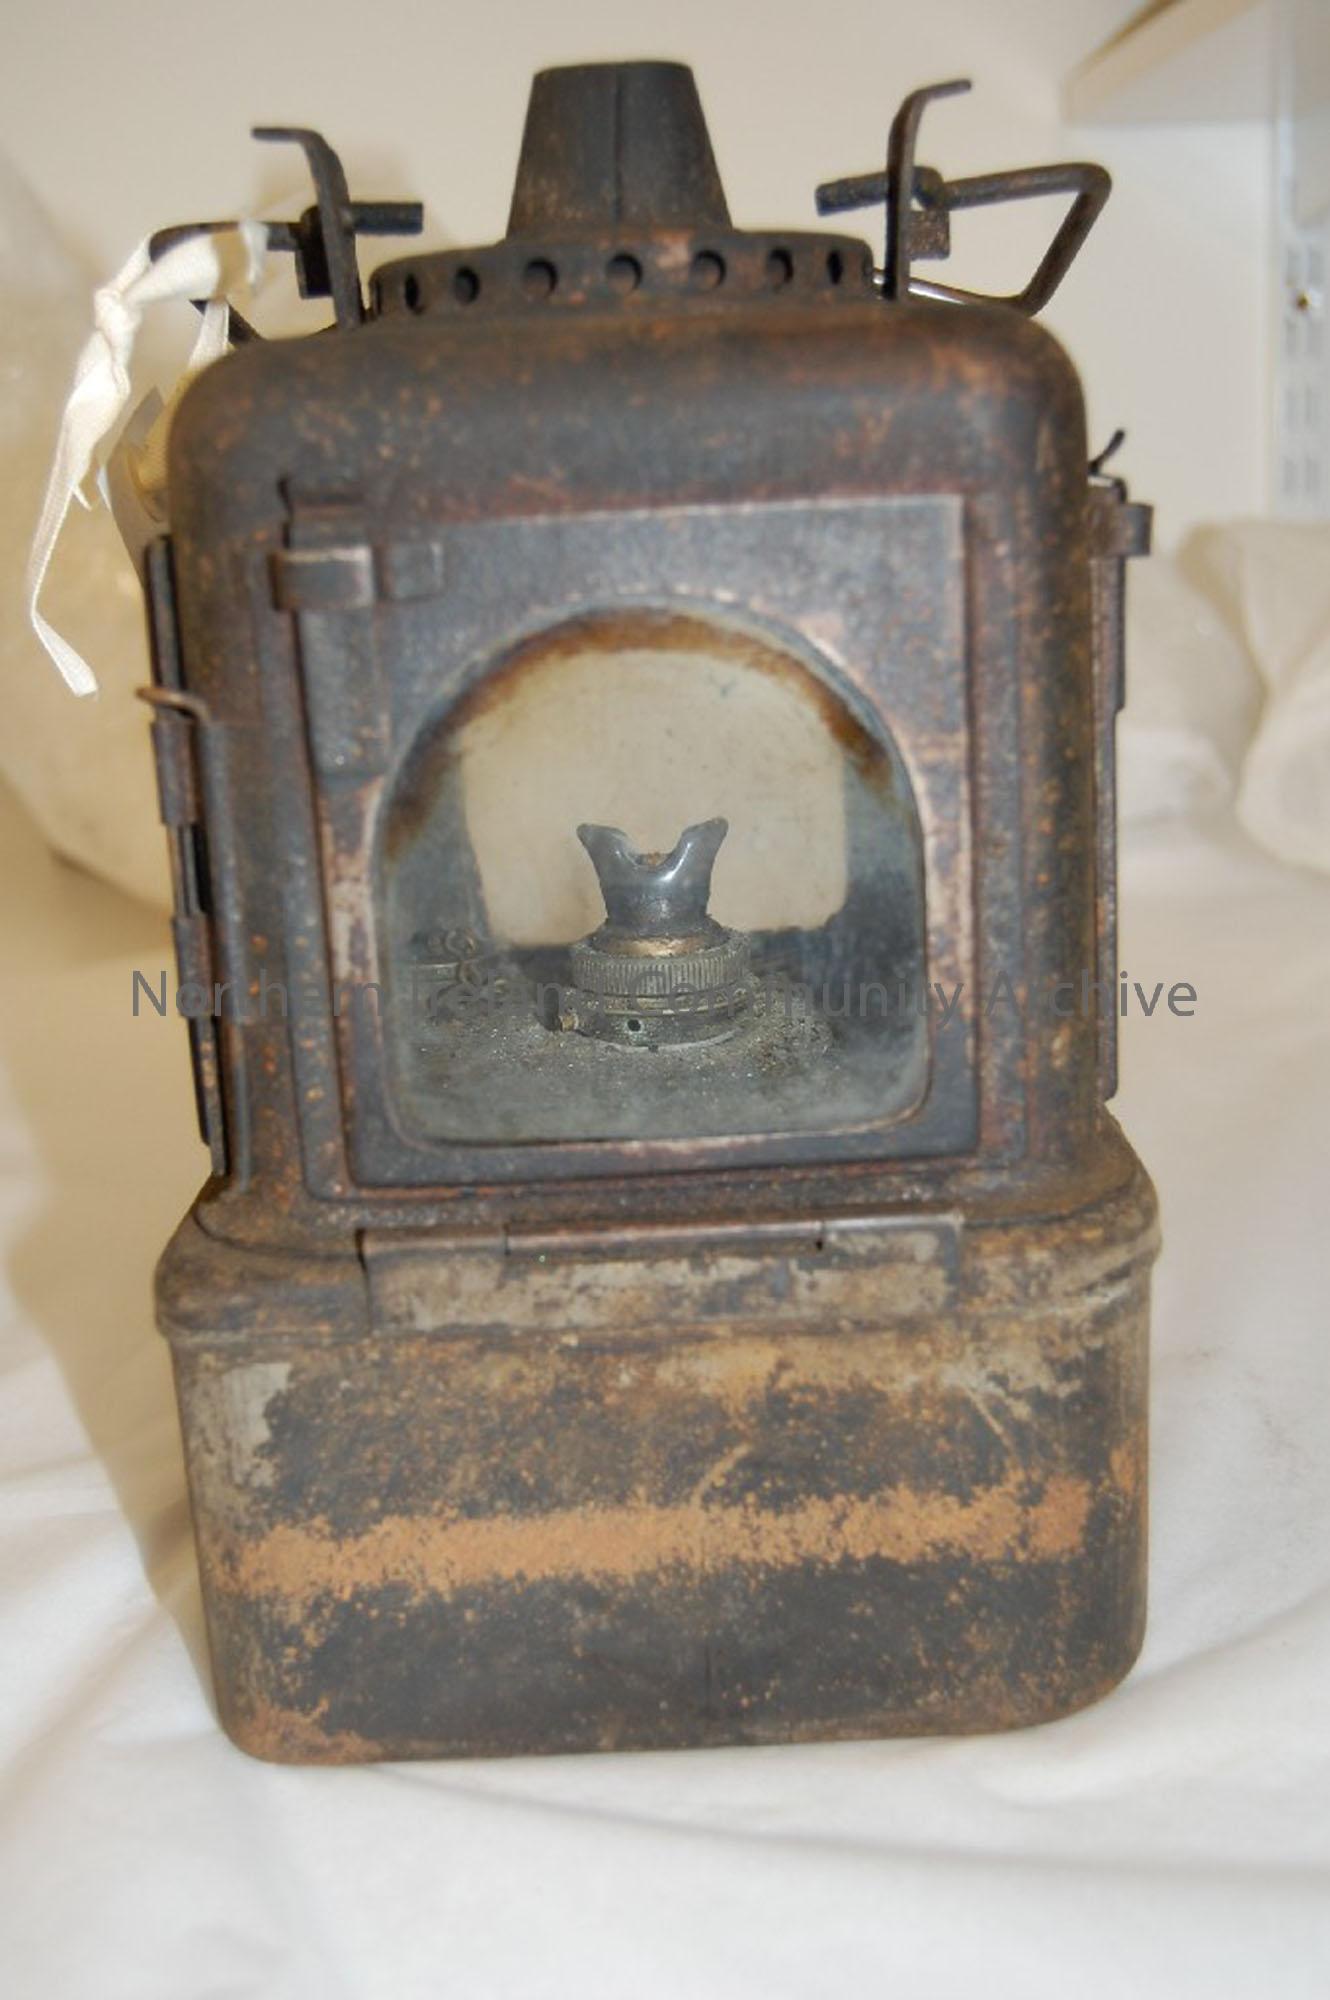 four sided paraffin lamp, with glass intact. Complete, blackened/tarnished by use. Requires restoration.